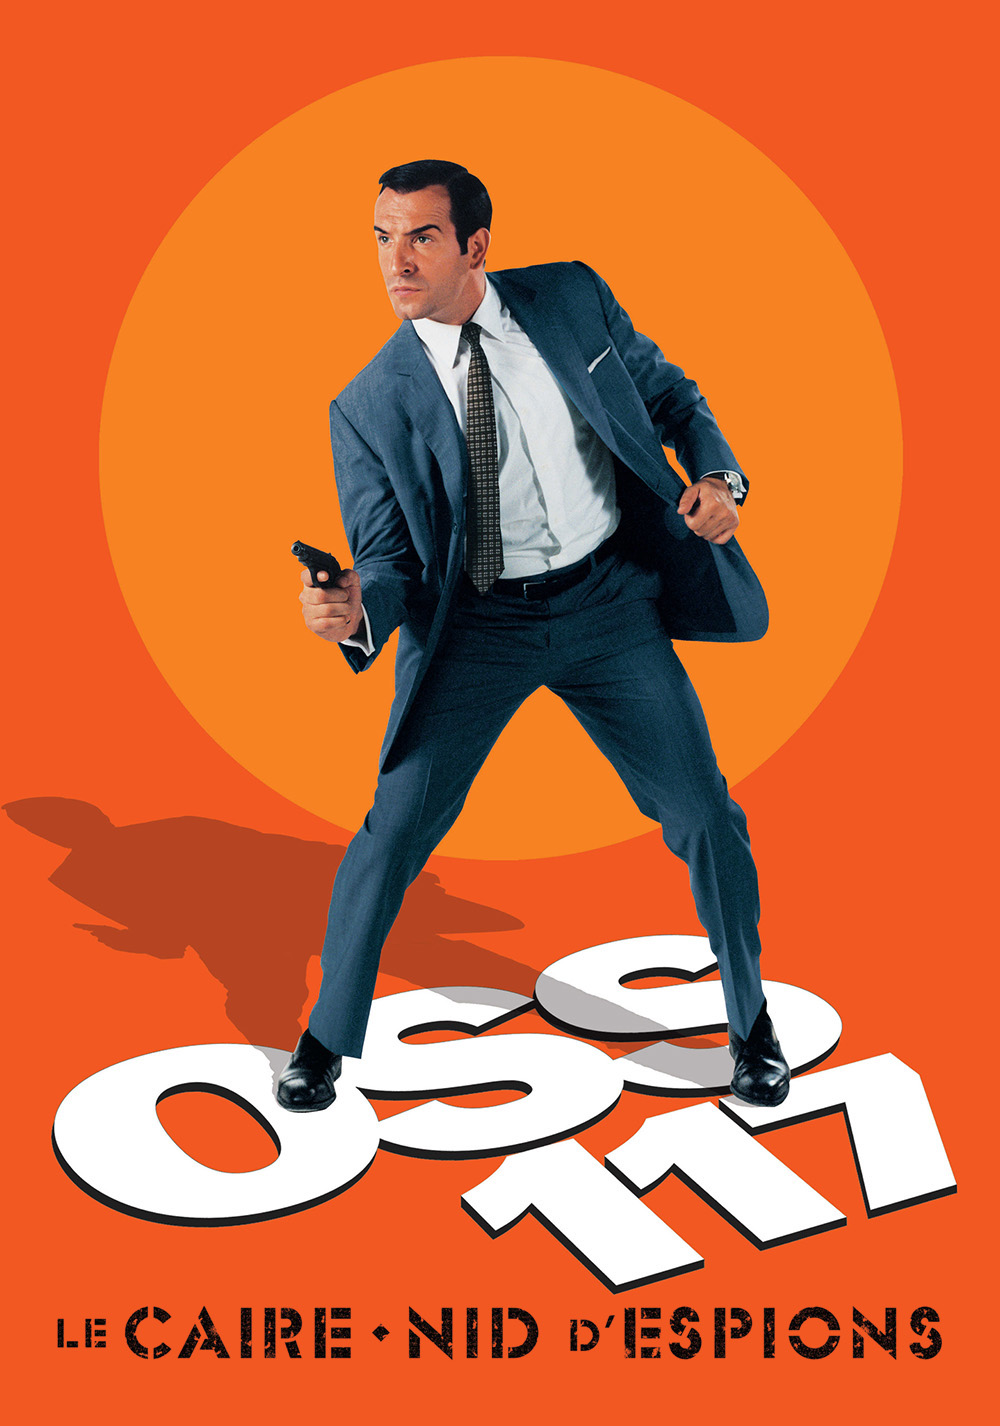 OSS 117: Cairo, Nest of Spies Picture